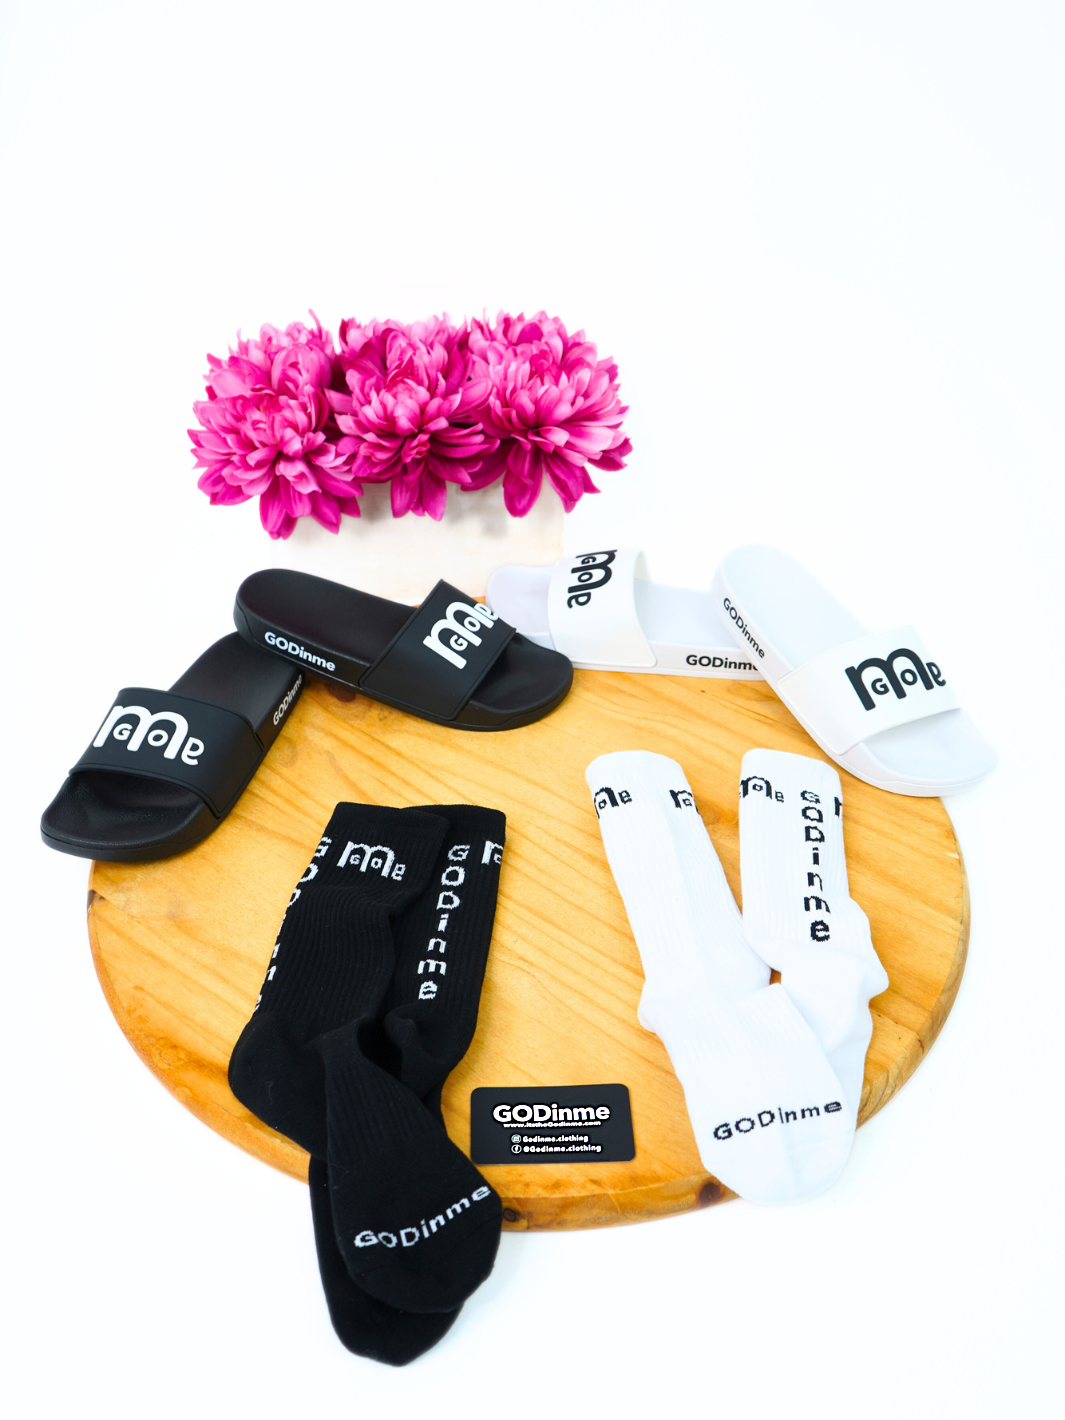 High quality Women Athletic Socks are comfortable yet durable; featuring the empowering GODinme logo on each side, and GODinme name at toes and back achilles area to give you the confidence and motivation to reach your fitness goals.